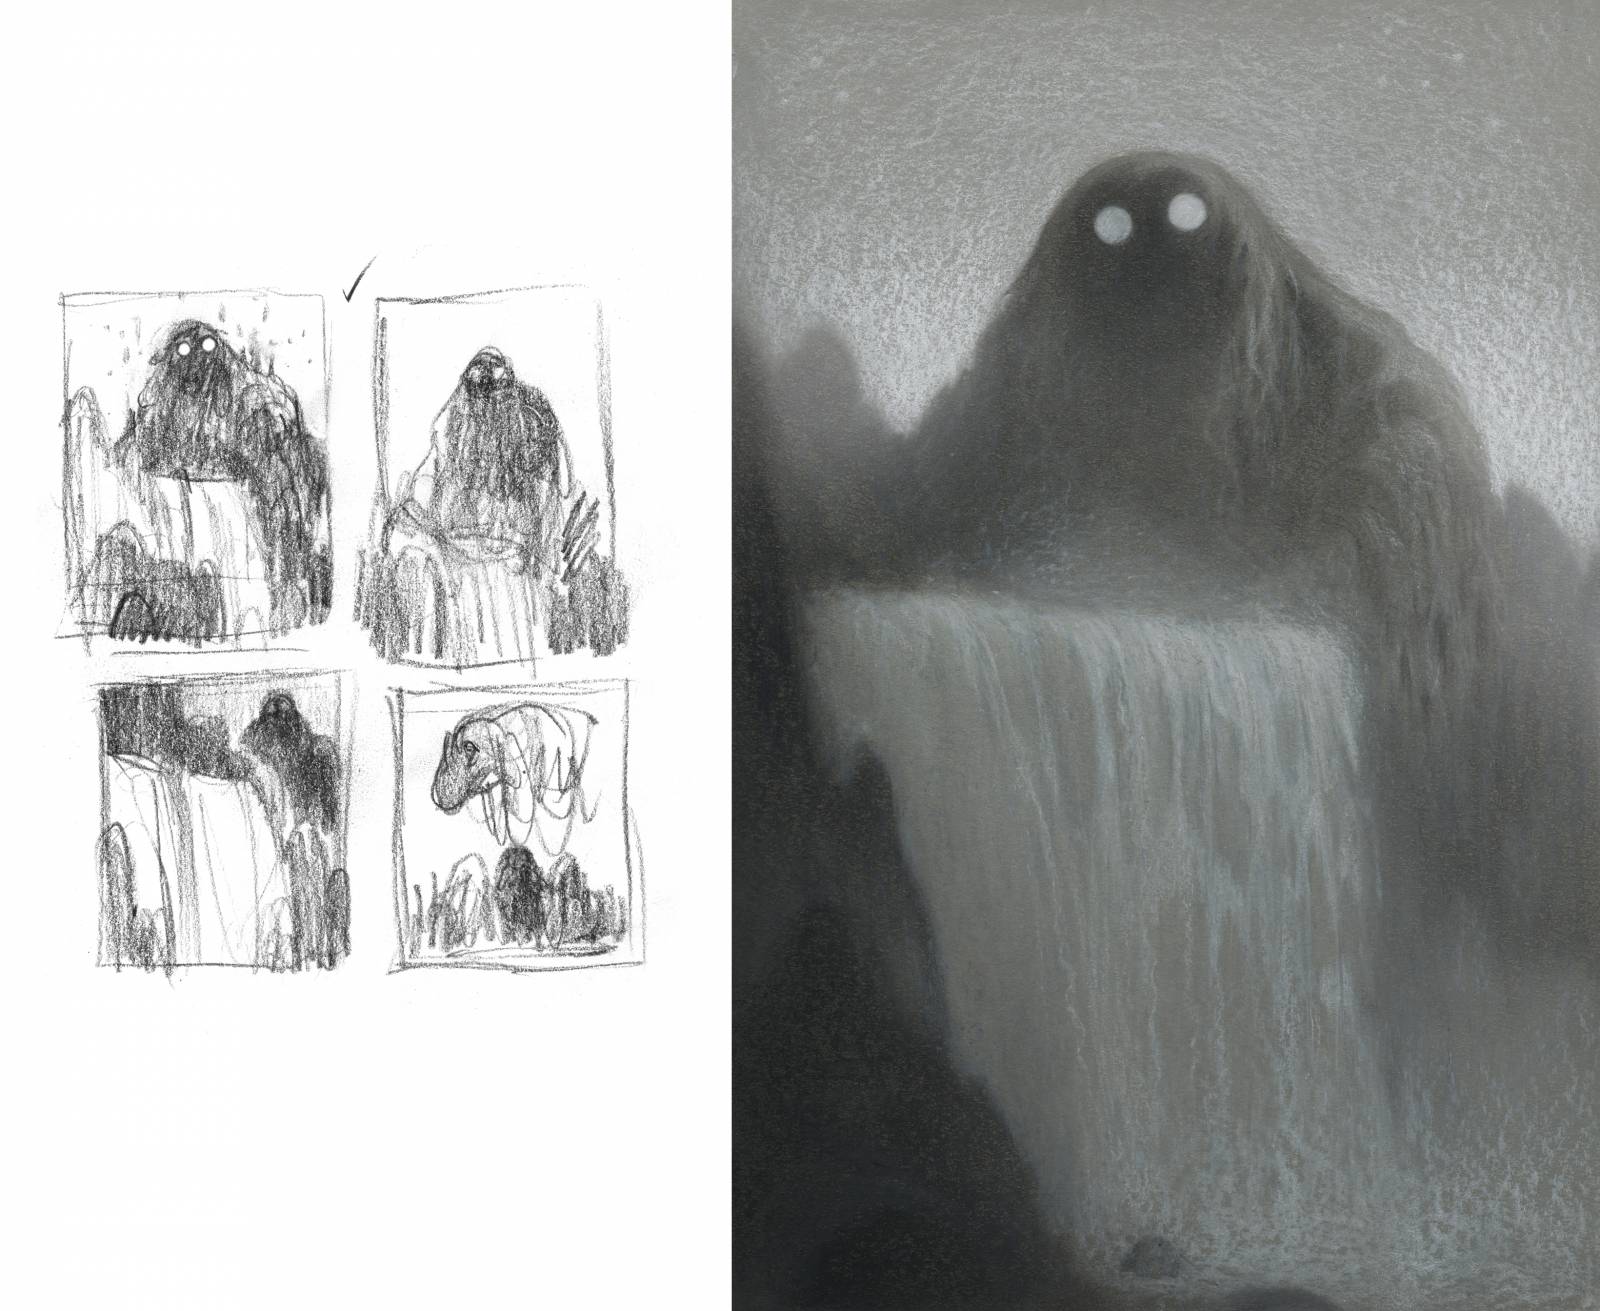 The Sketch VS The Final